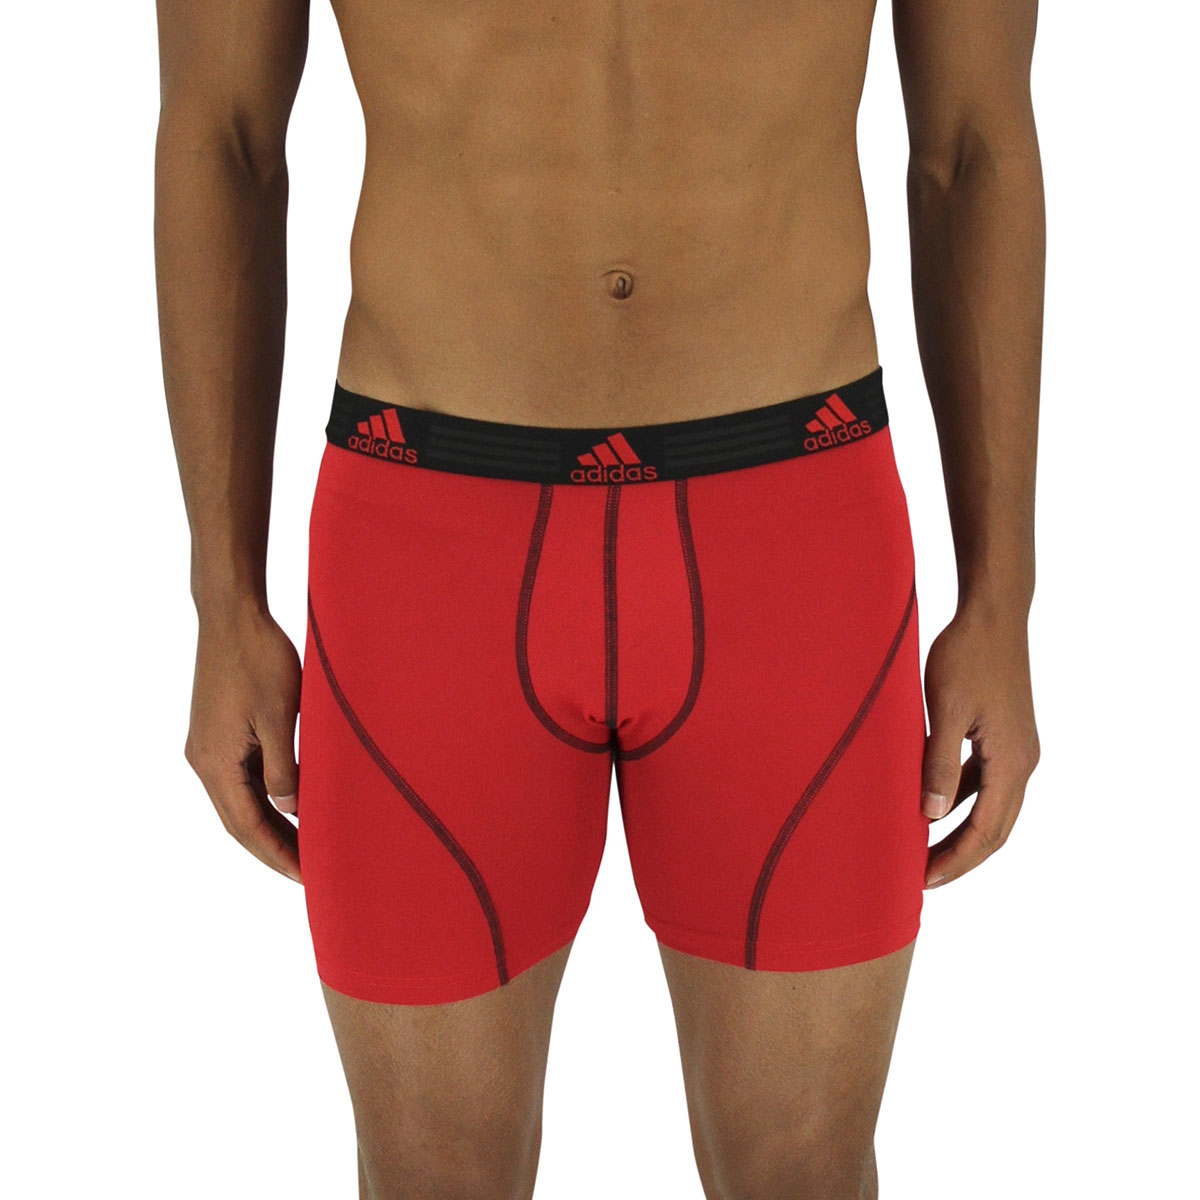 Adidas Men Underwear Boxer Briefs Shorts 1 PC Red Climacool Light Move